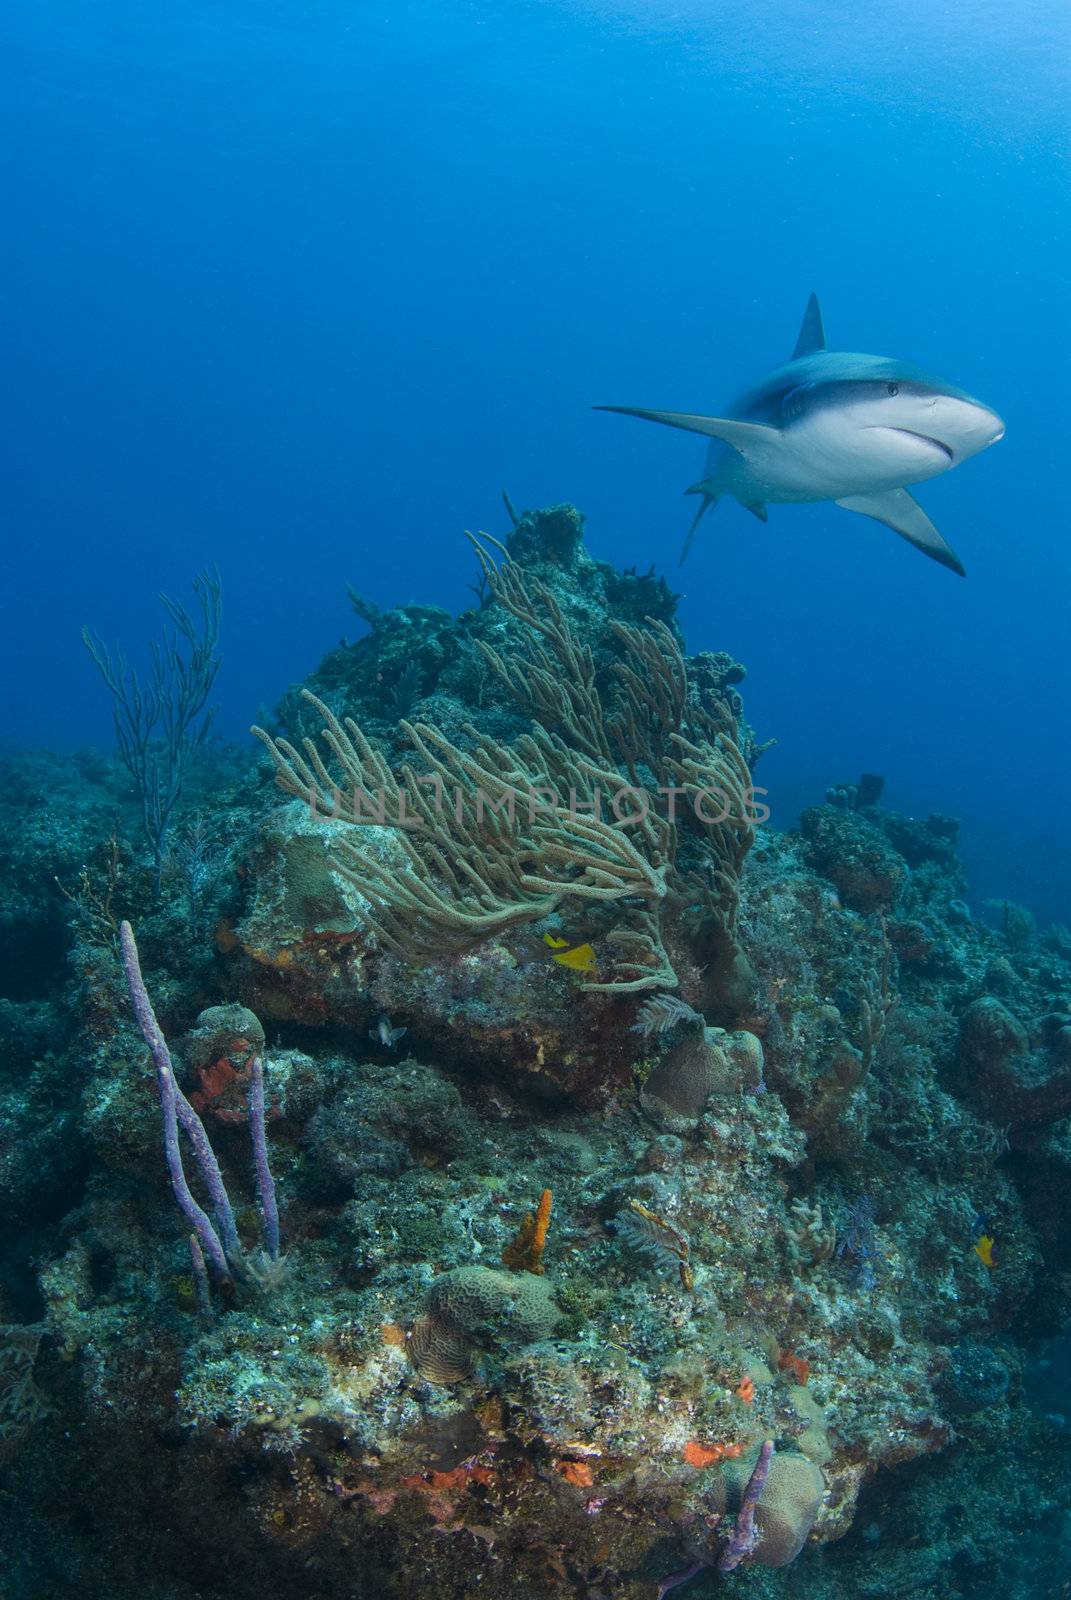 A Caribbean Reef Shark (Carcharhinius perezi) swims over coral reef growth in the blue waters of the Bahamas